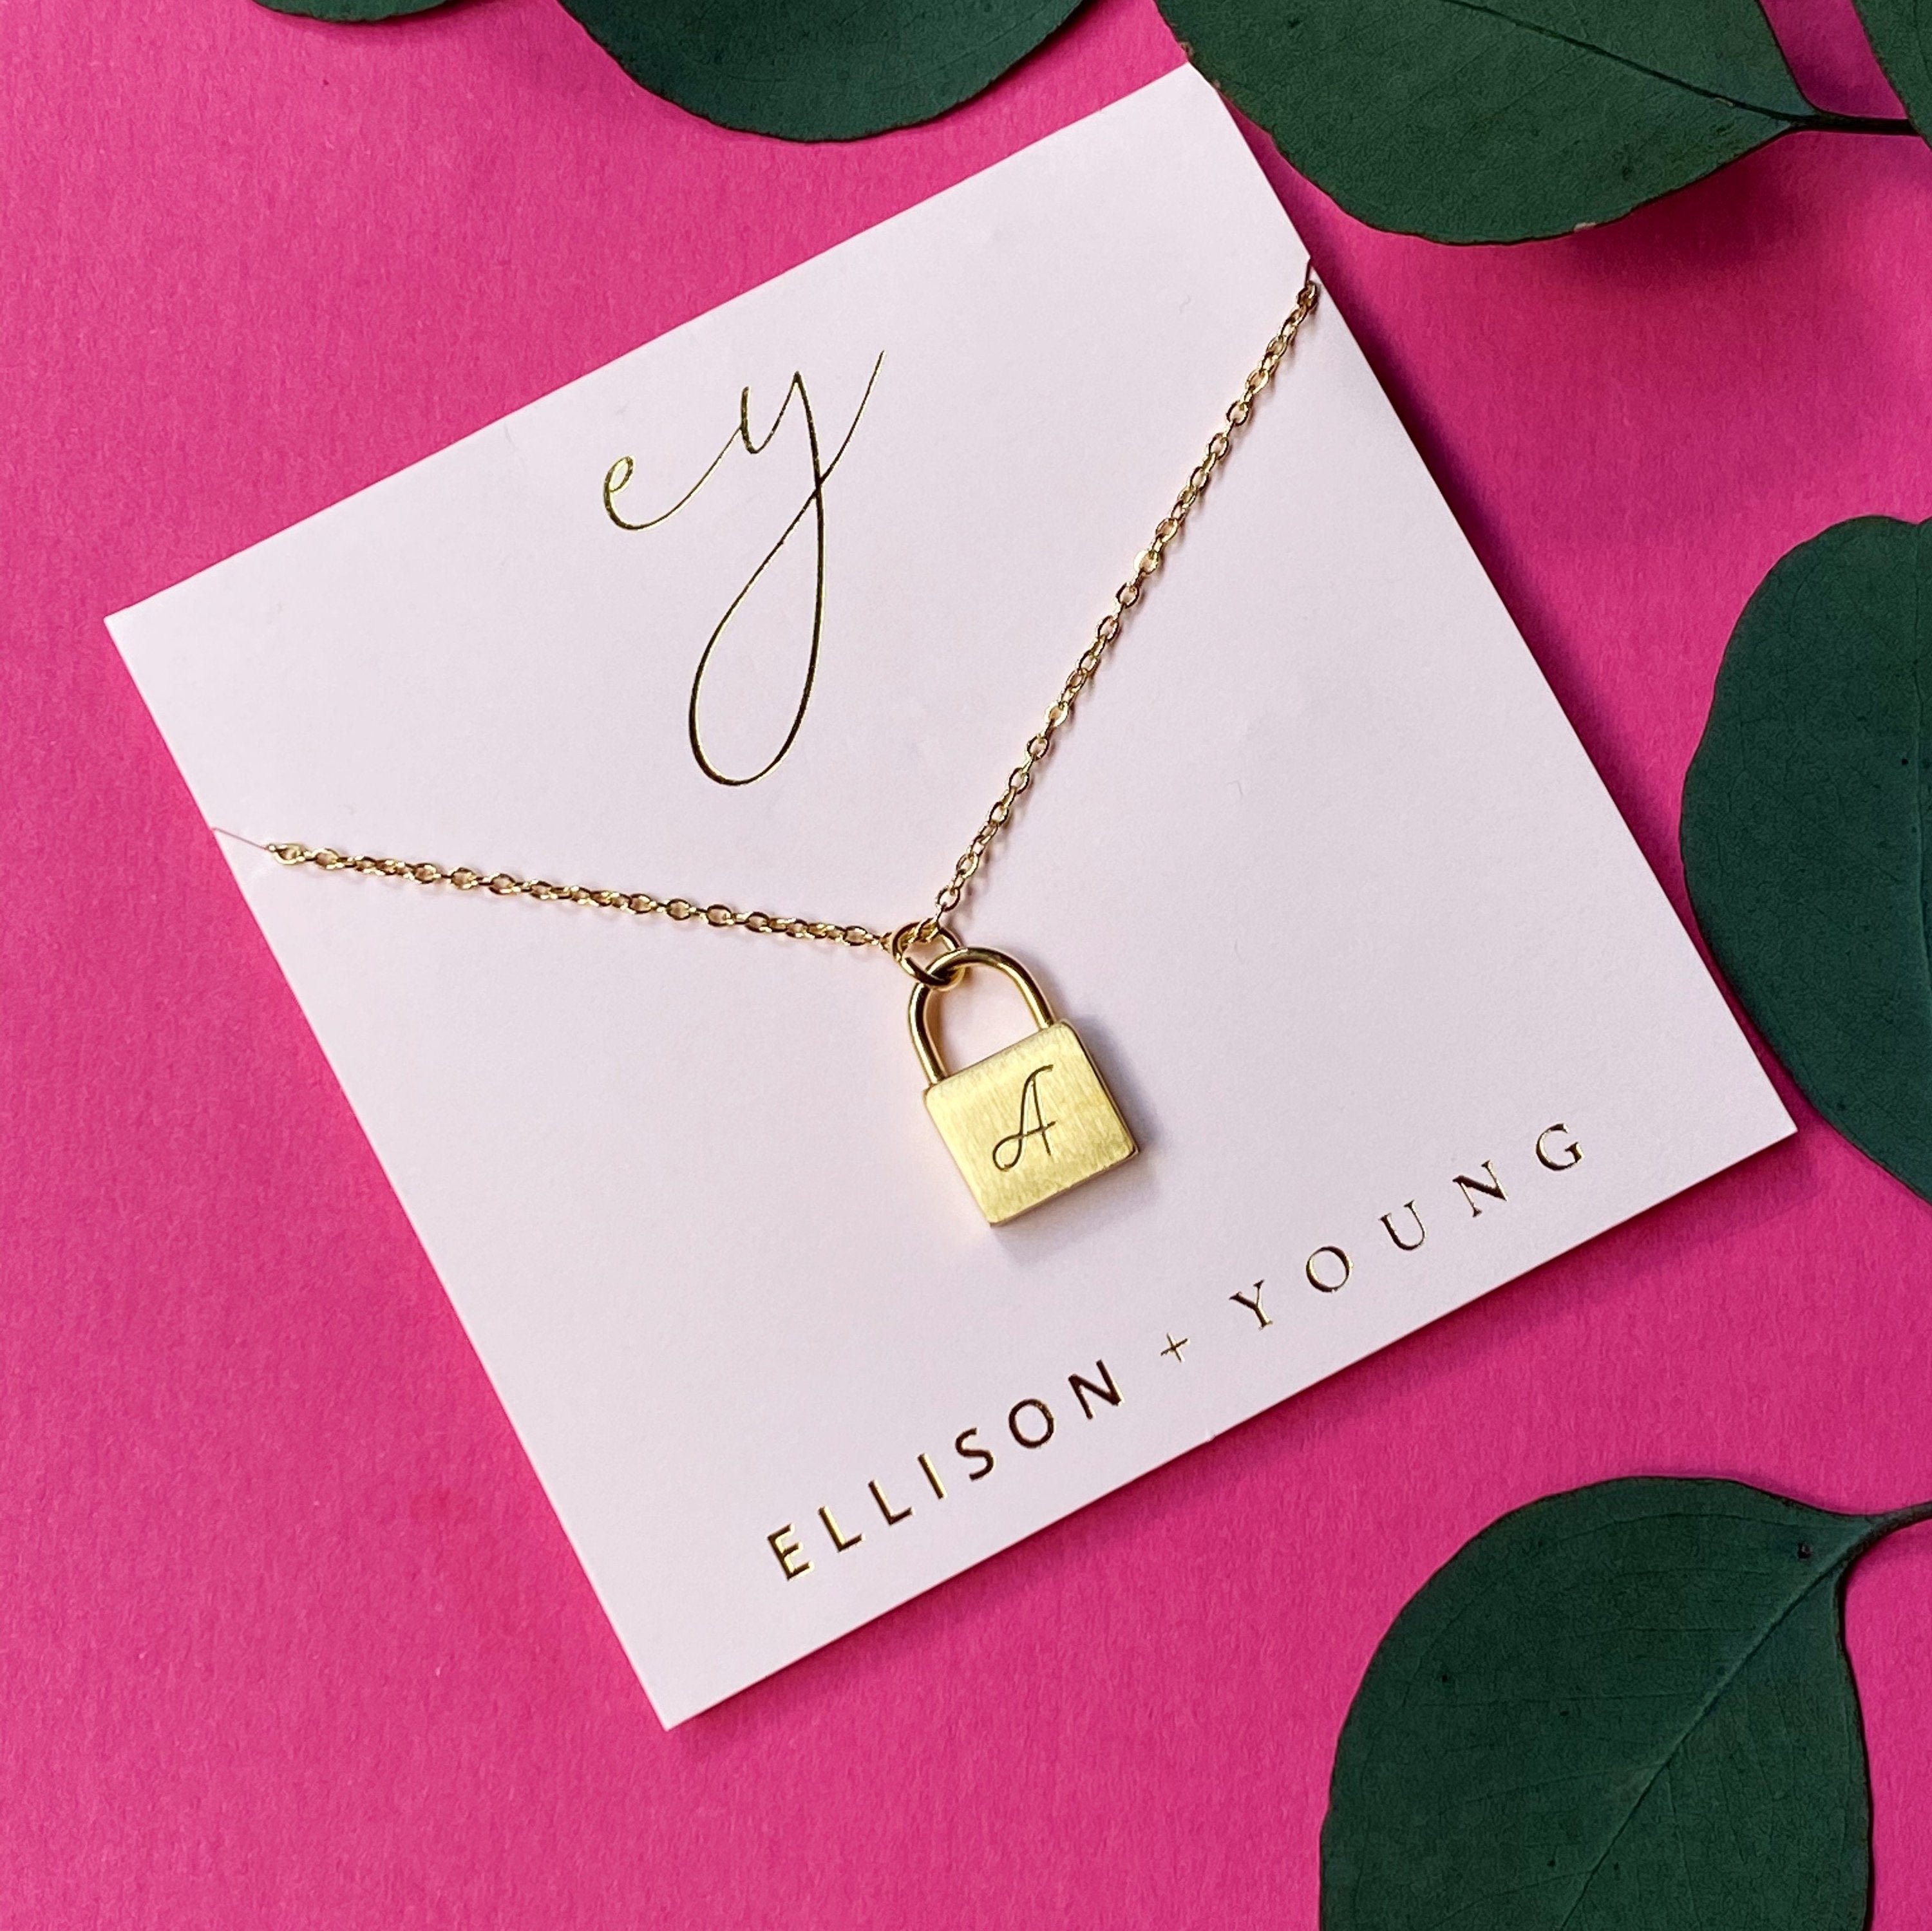 Scripted Initial Necklace with Lock Pendant - Brushed Finish, Blush Color Card Packaging
Keywords: initial necklace, lock pendant, scripted font, brushed finish, blush color, packaging. - Necklaces - Bijou Her -  -  - 